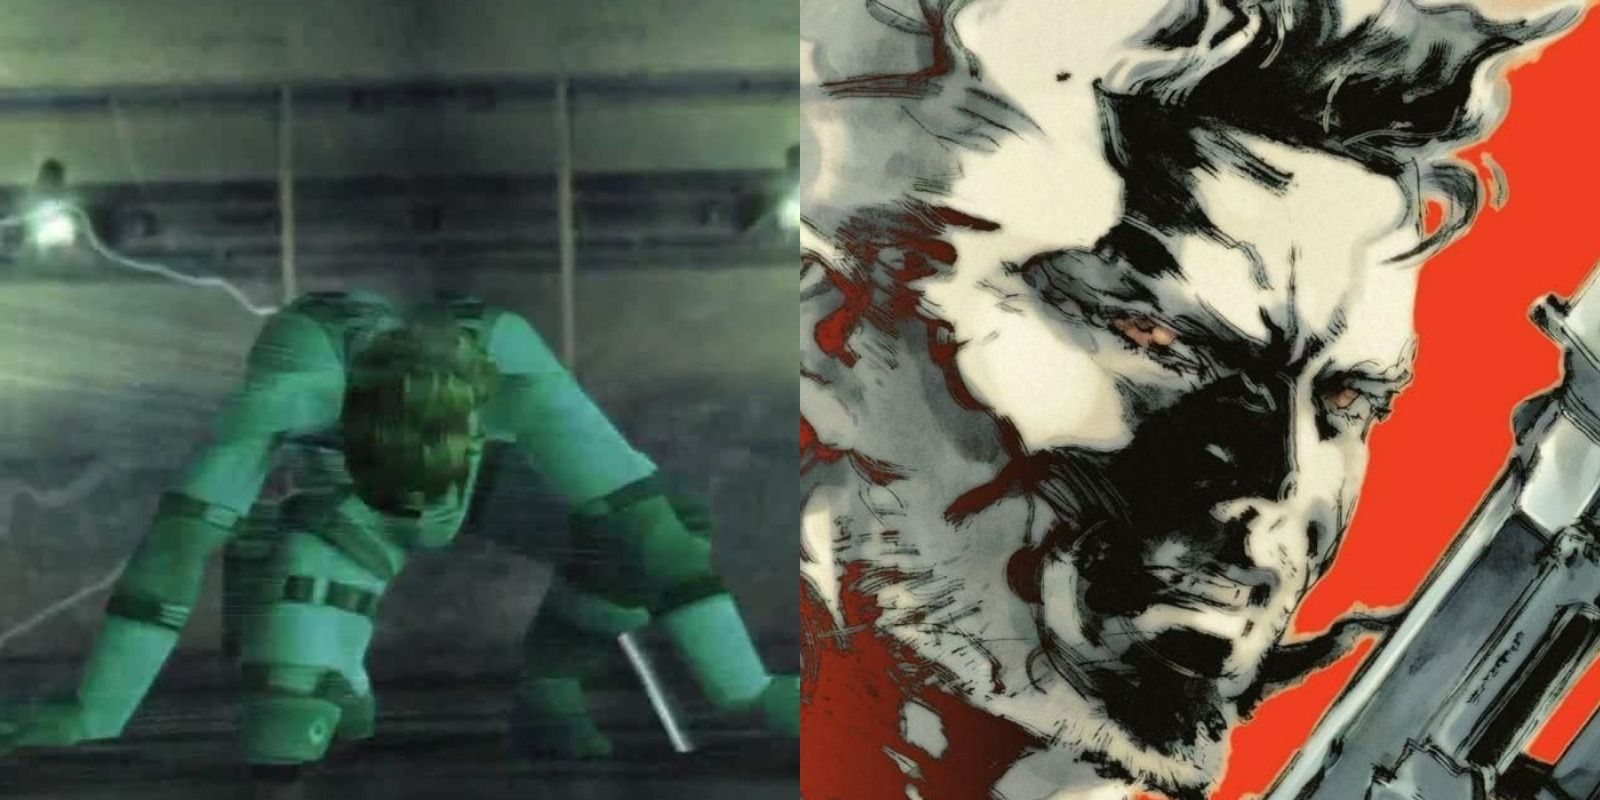 Split image of the opening to Metal Gear Solid 2 and key art for it